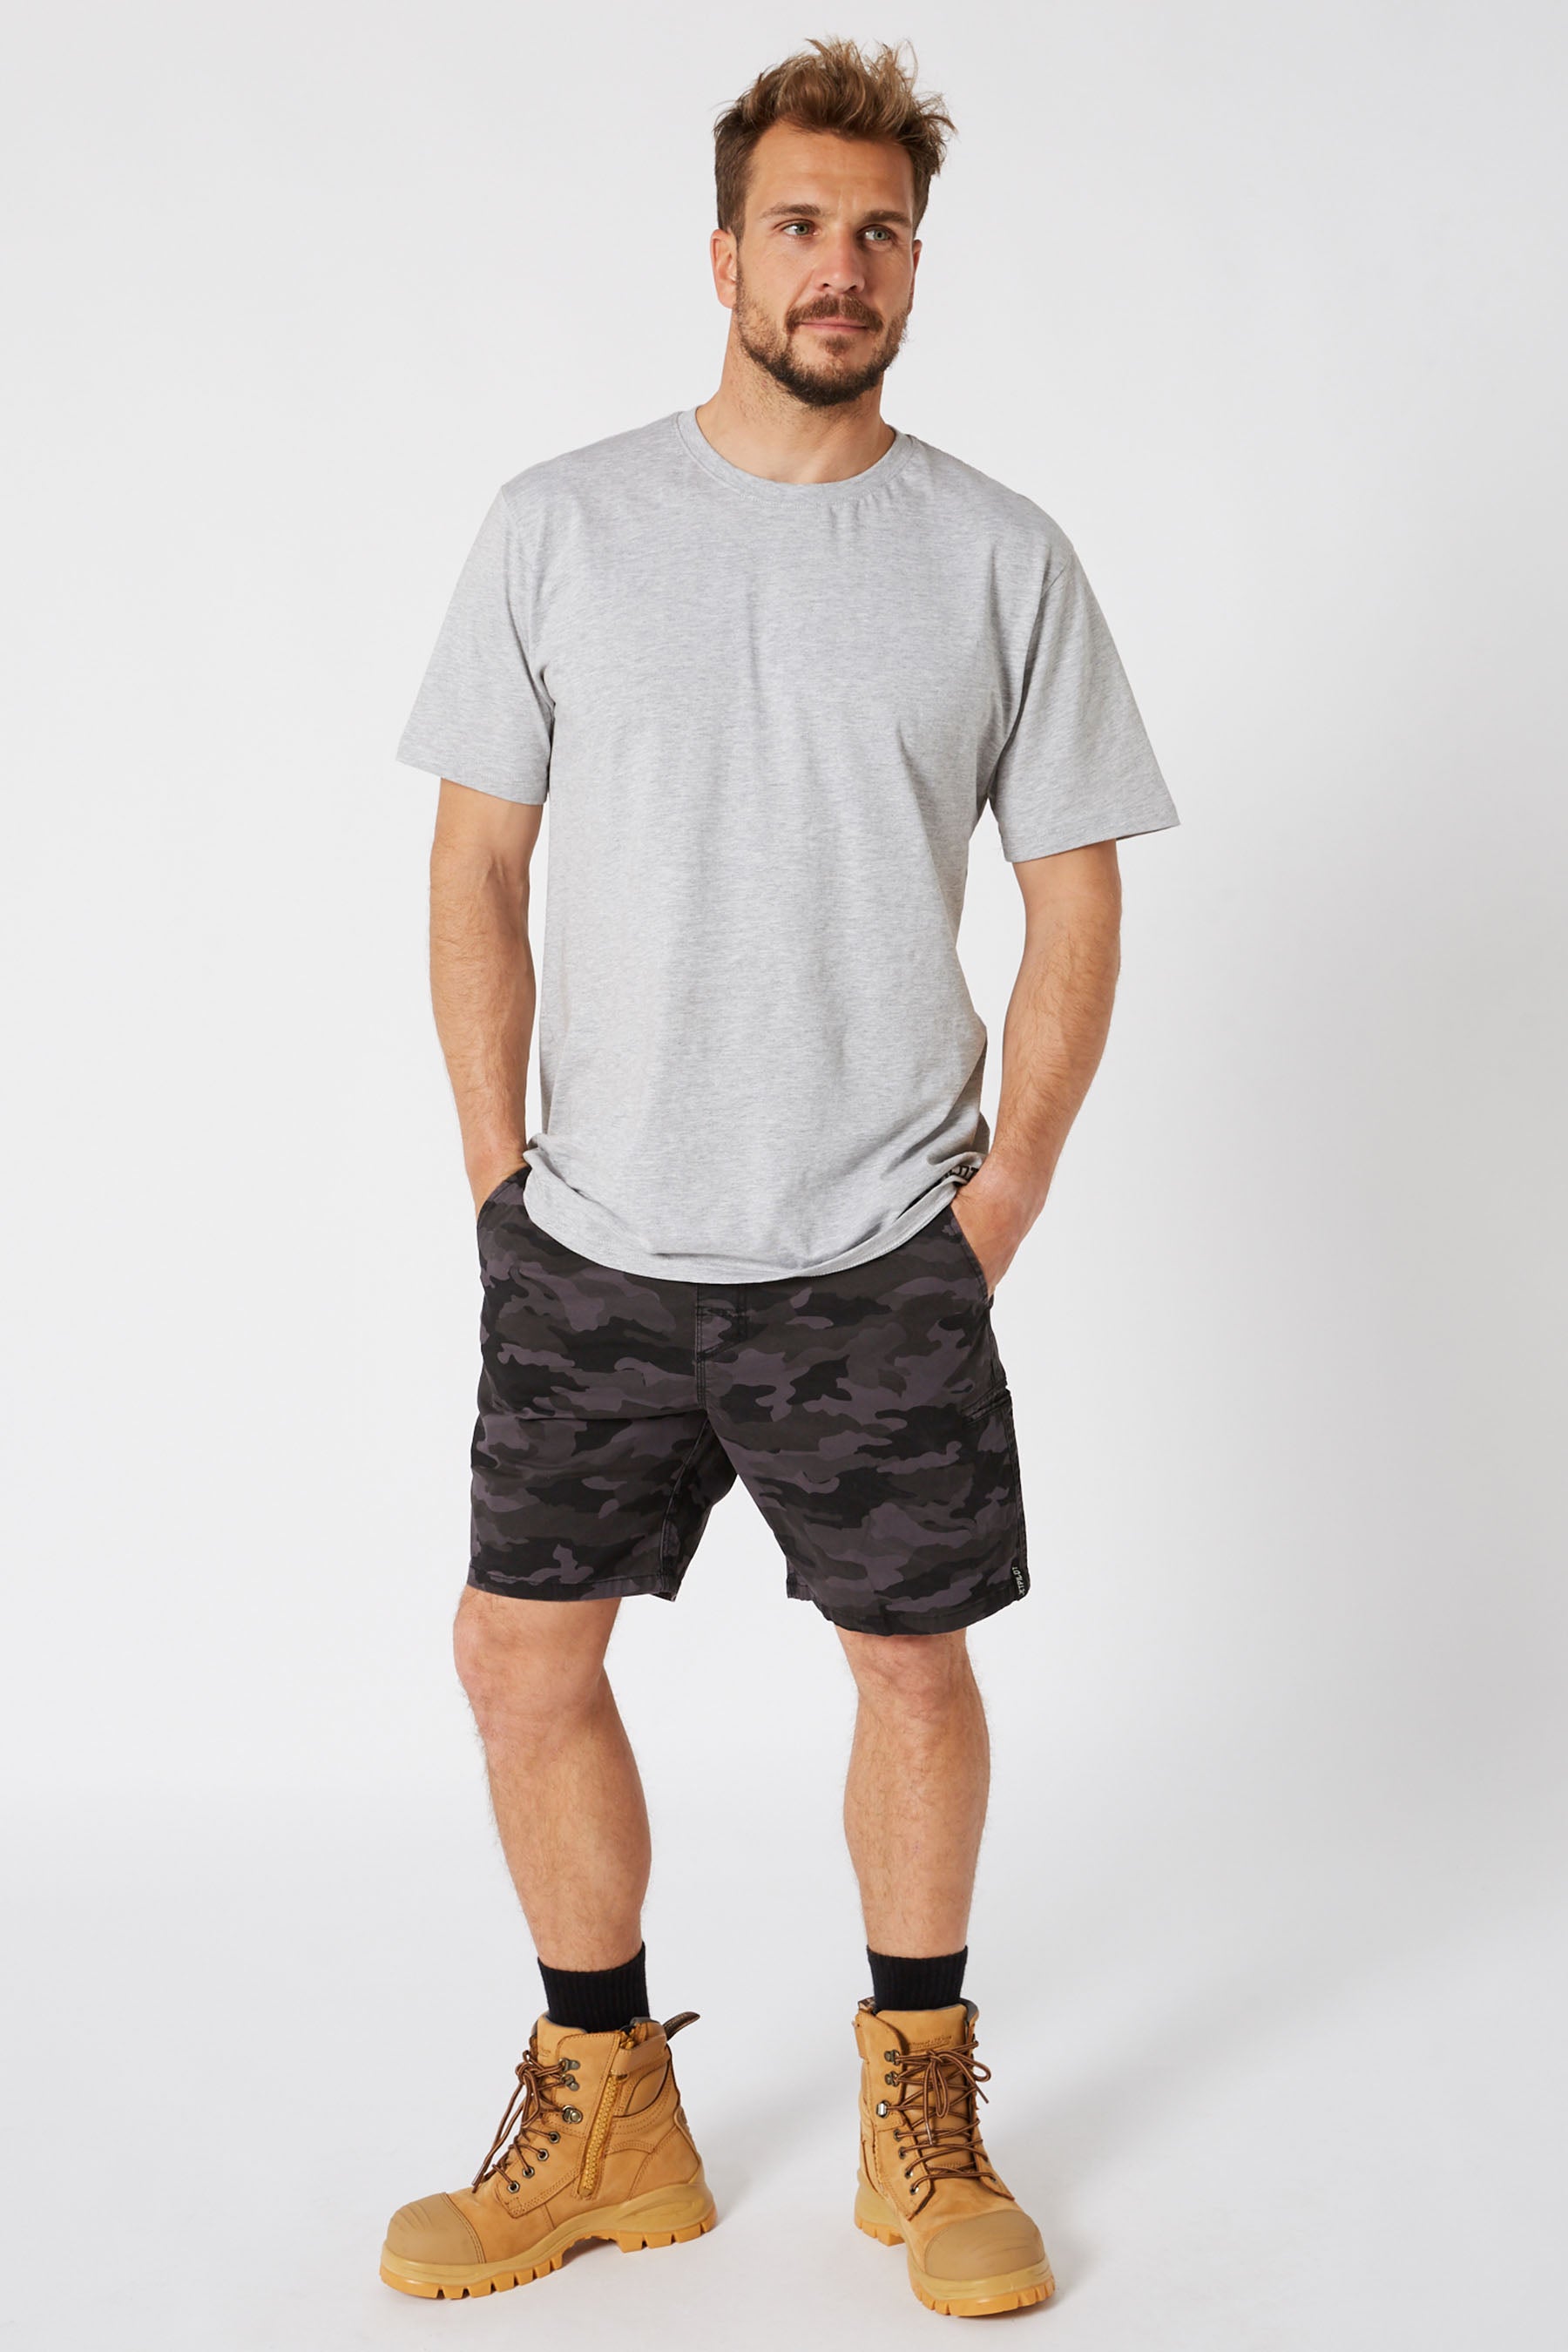 JP Stretched Out Walkshort - Camo